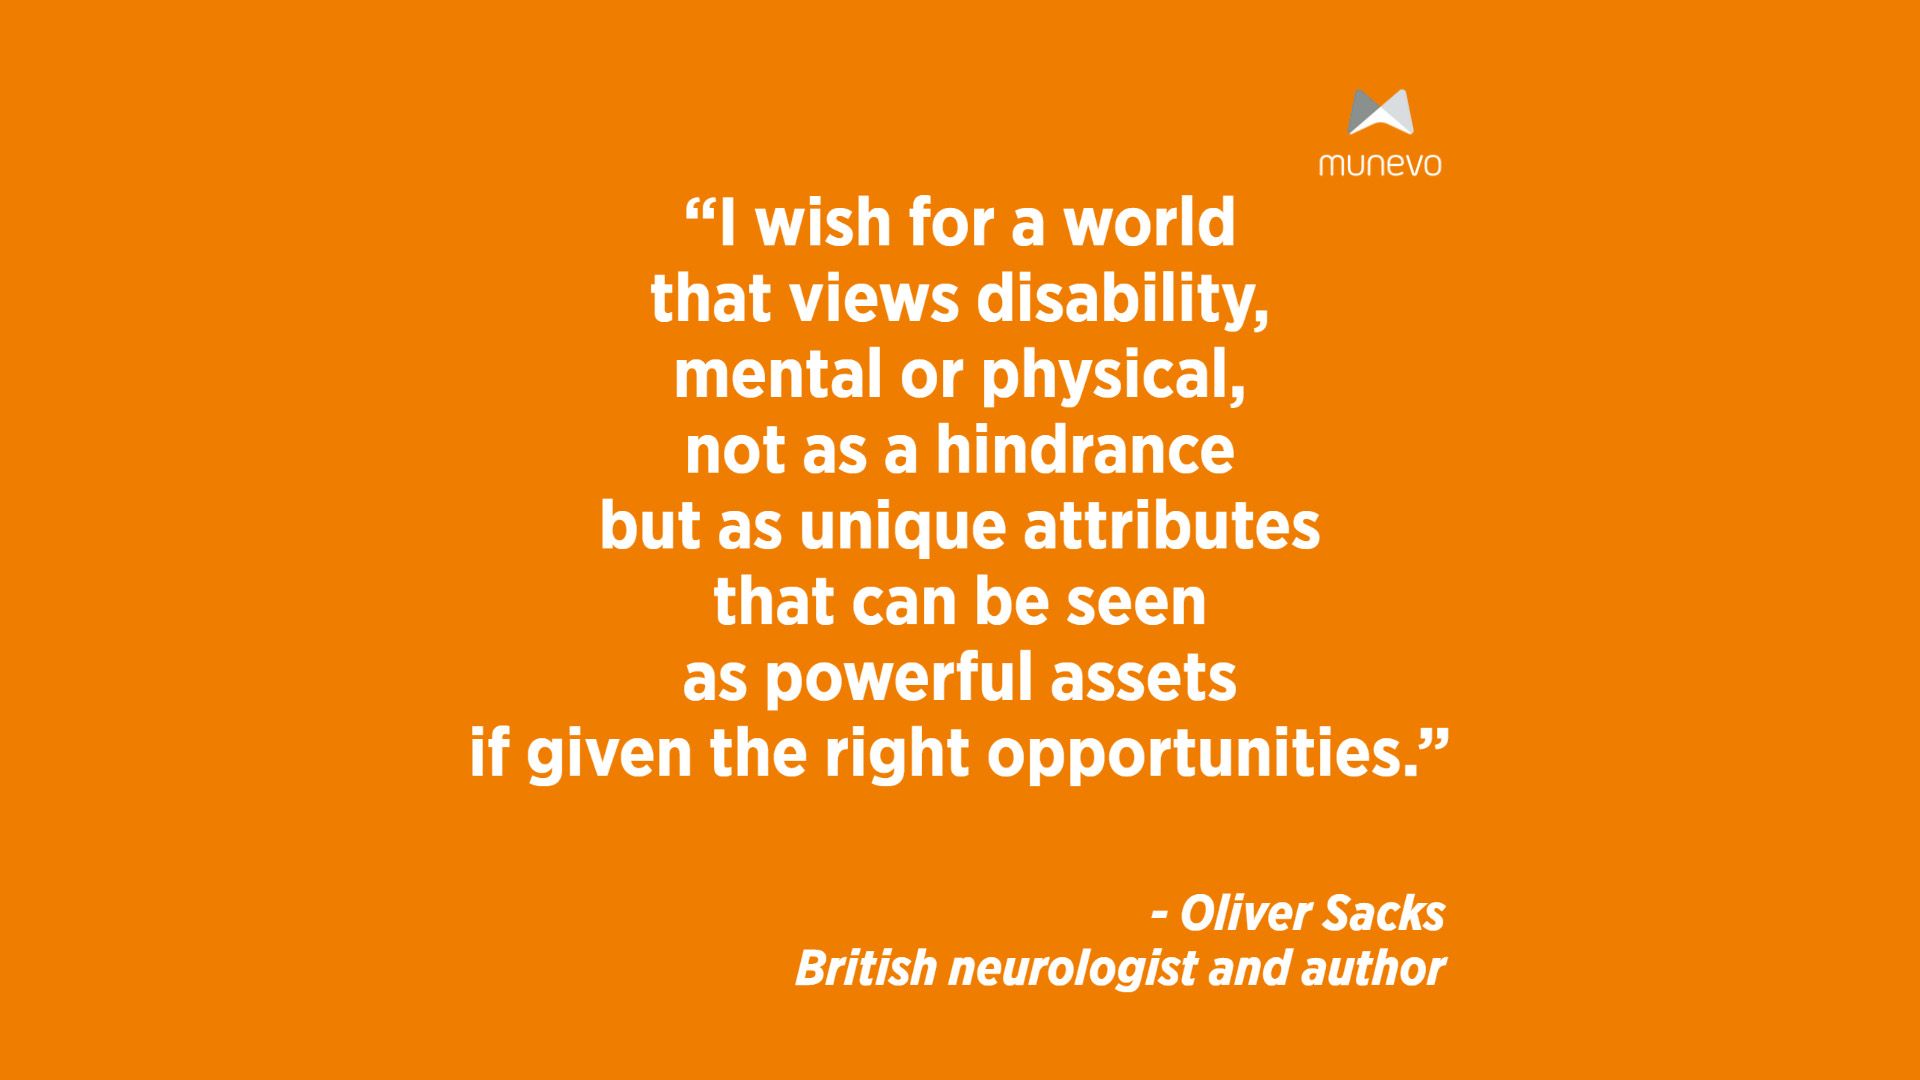 "I wish for a world that views disability, mental or physical, not as a hindrance but as unique attributes that can be seen as powerful assets if given the right opportunities." - Oliver Sacks British neurologist and author